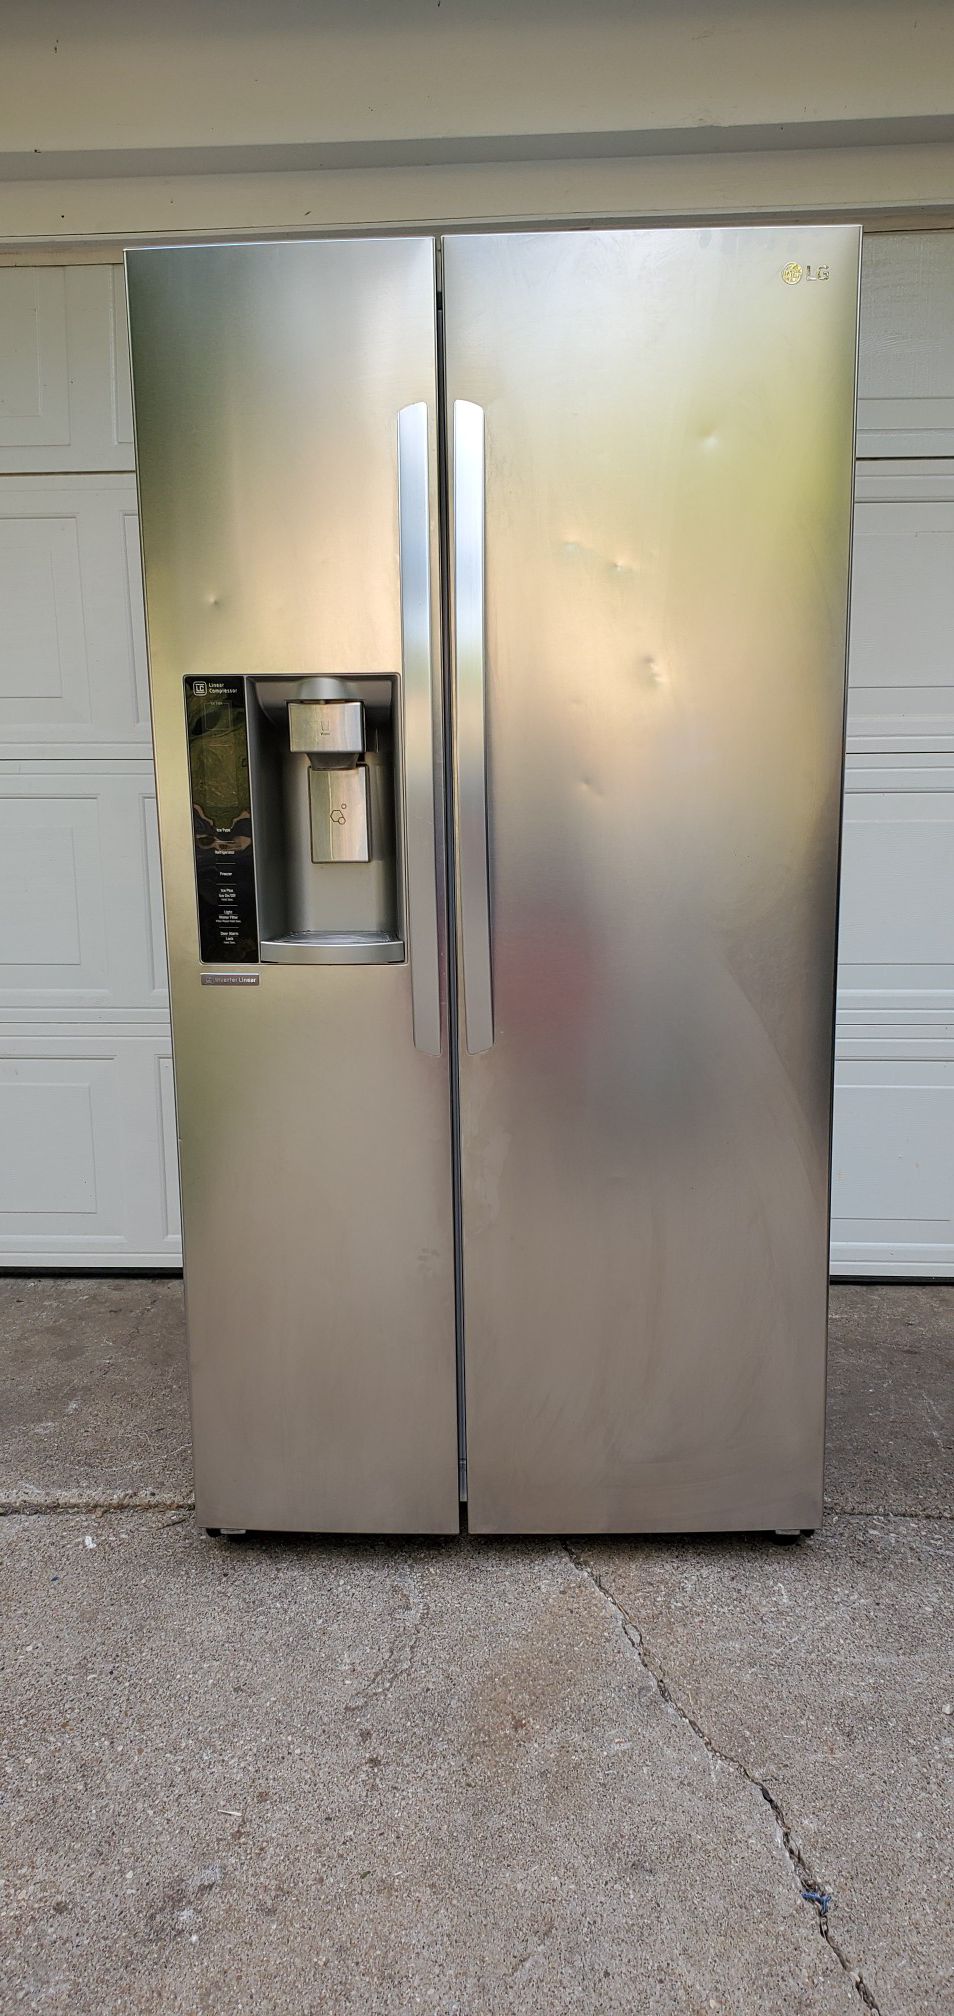 LG stainless steel 26.2 cu. ft. side by side refrigerator with in-door ice maker.